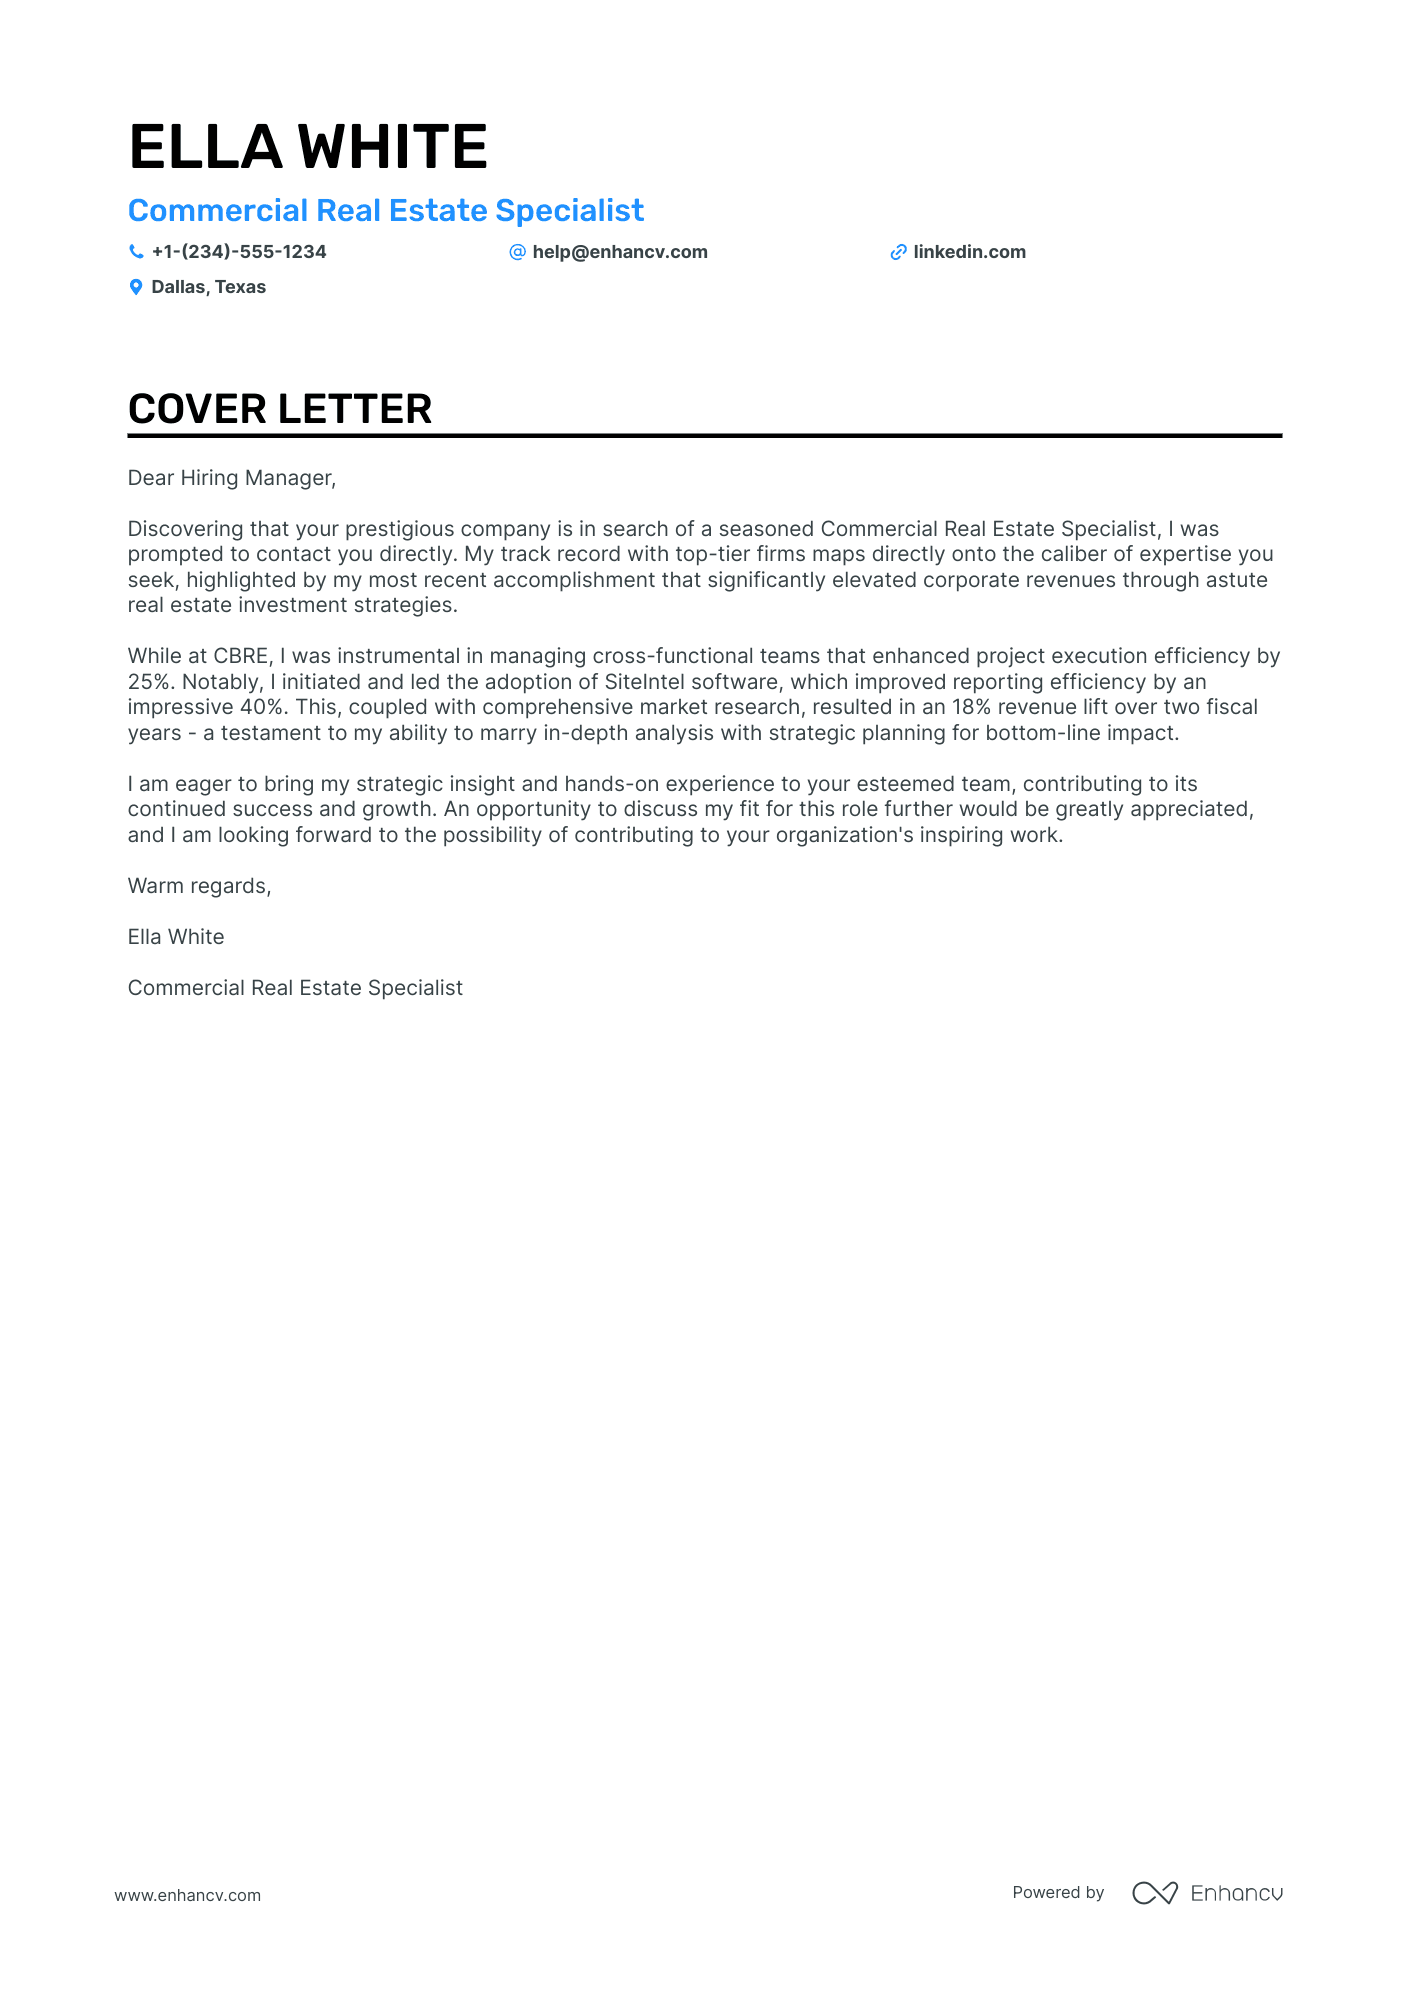 real estate agent cover letter examples